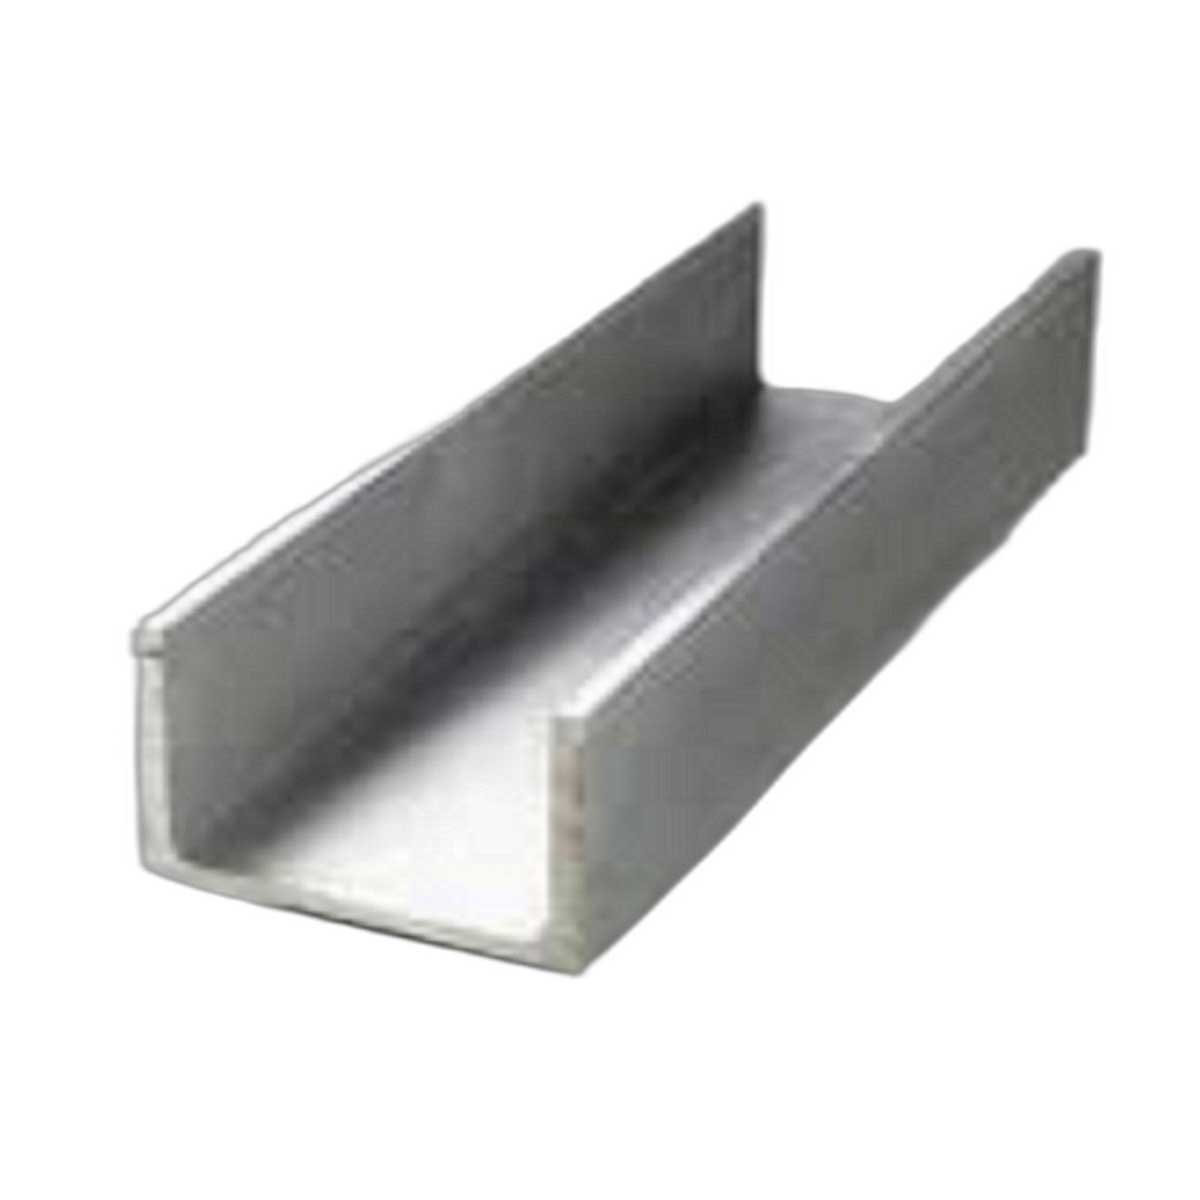 Aluminium U Shaped Channel Manufacturers, Suppliers in Kharagpur